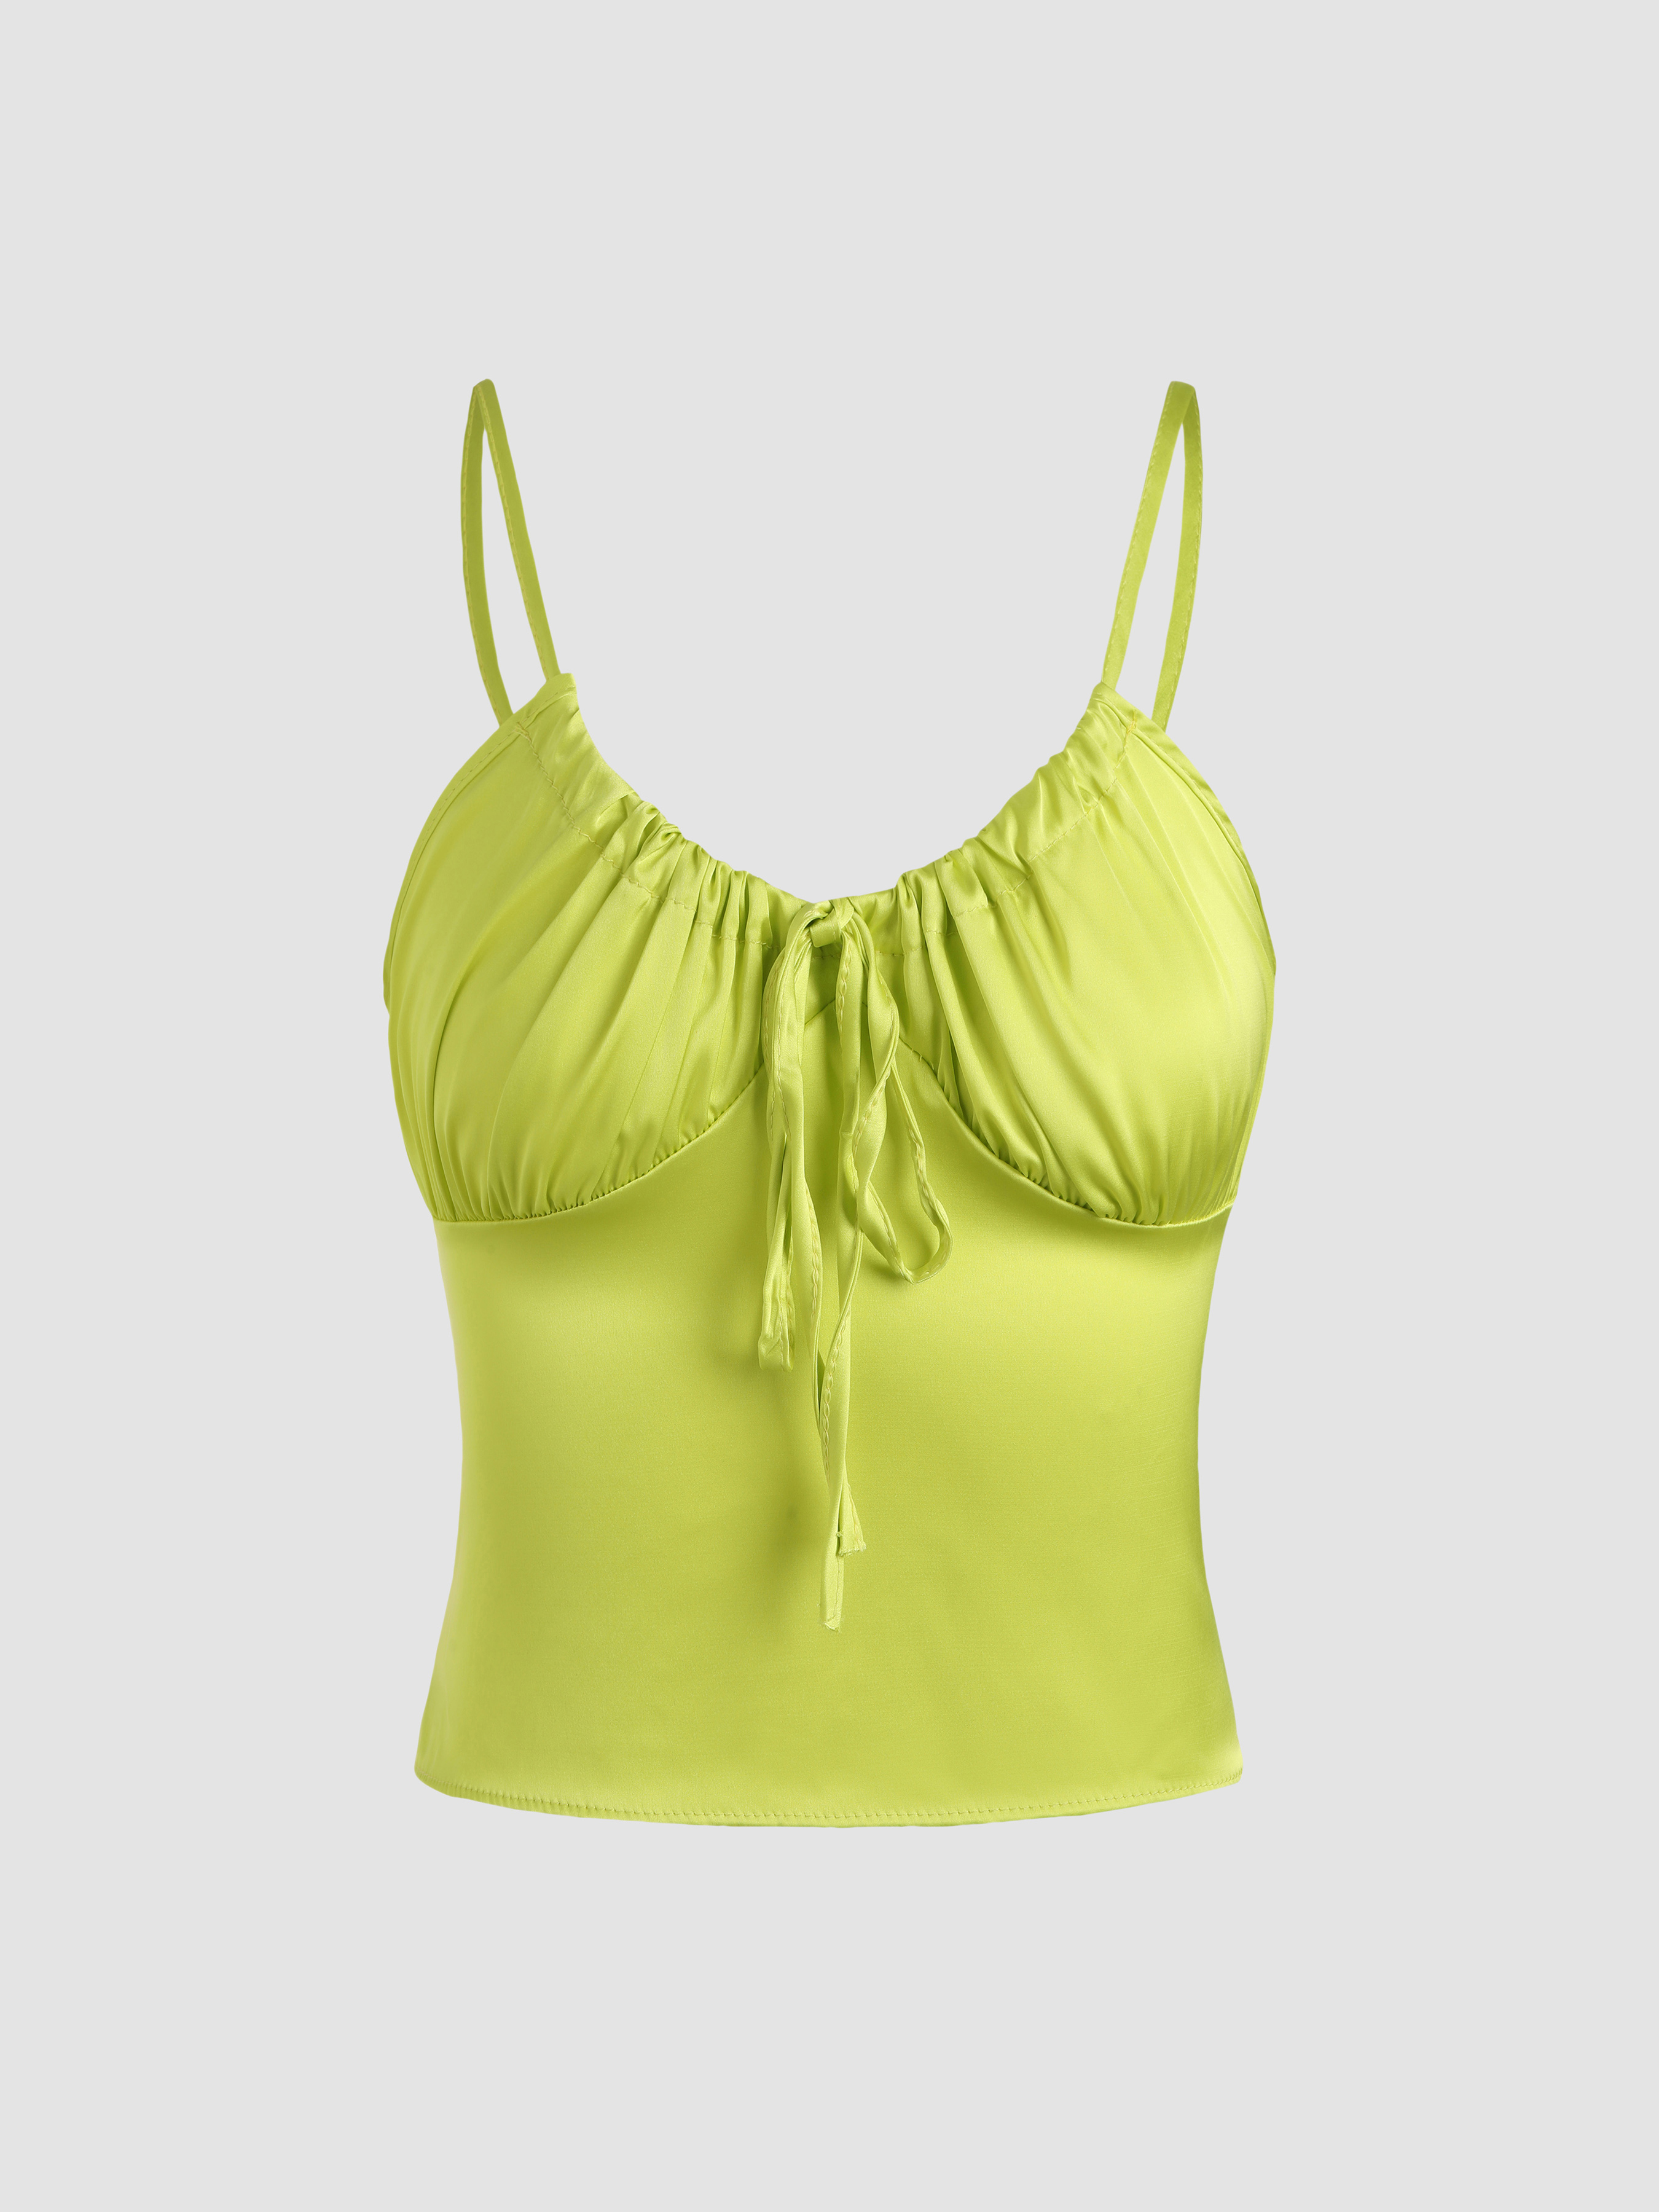 Green Sweetheart Cami Top - Cider